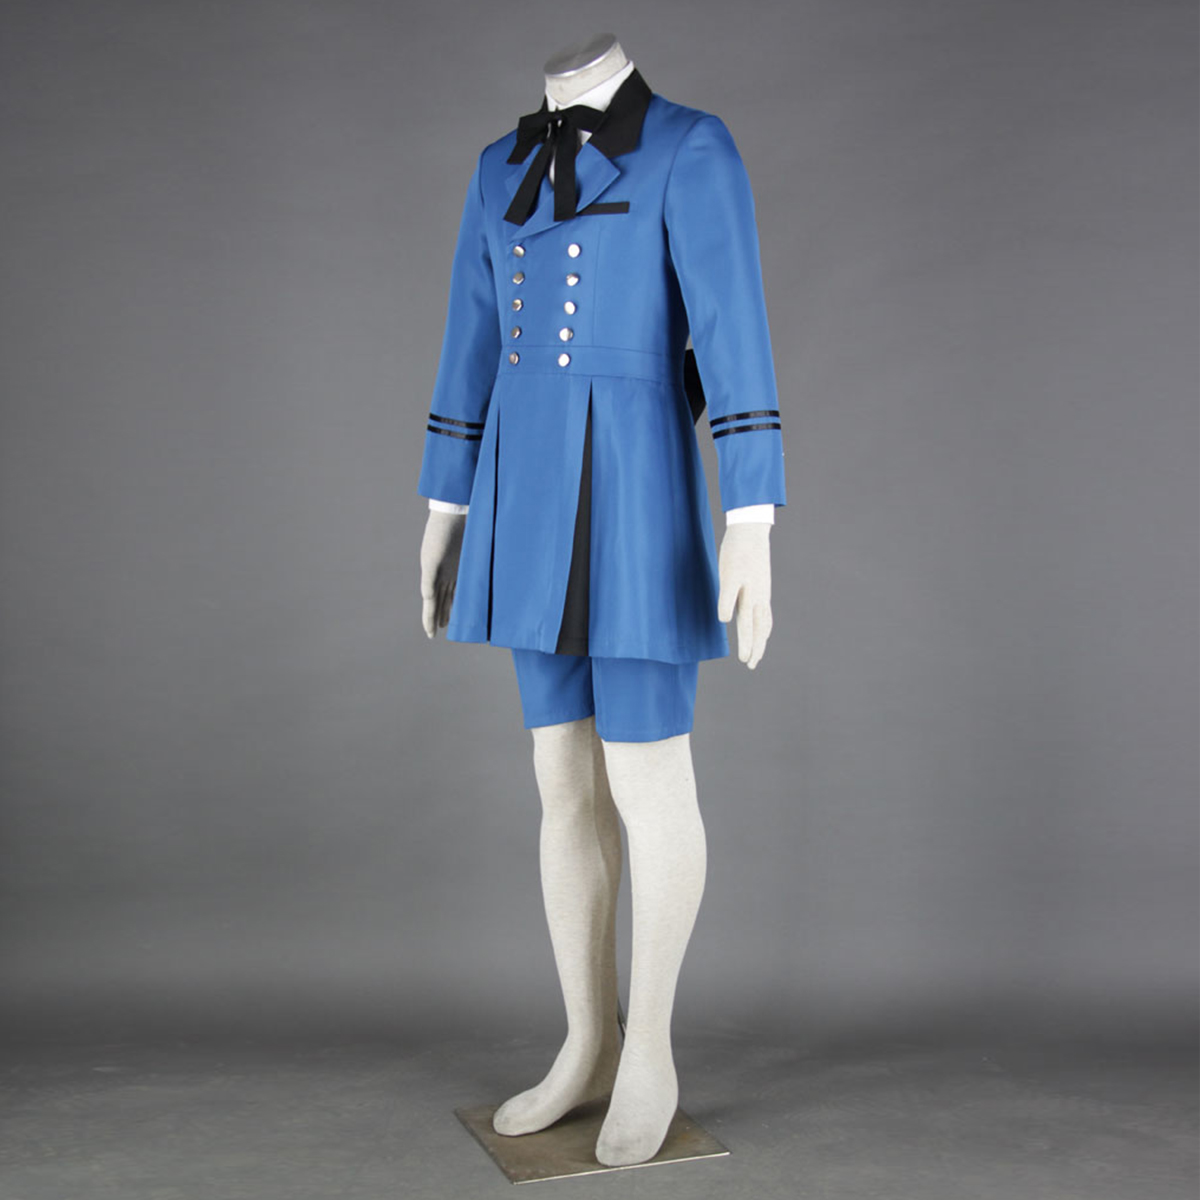 Black Butler Ciel Phantomhive 5 Anime Cosplay Costumes Outfit